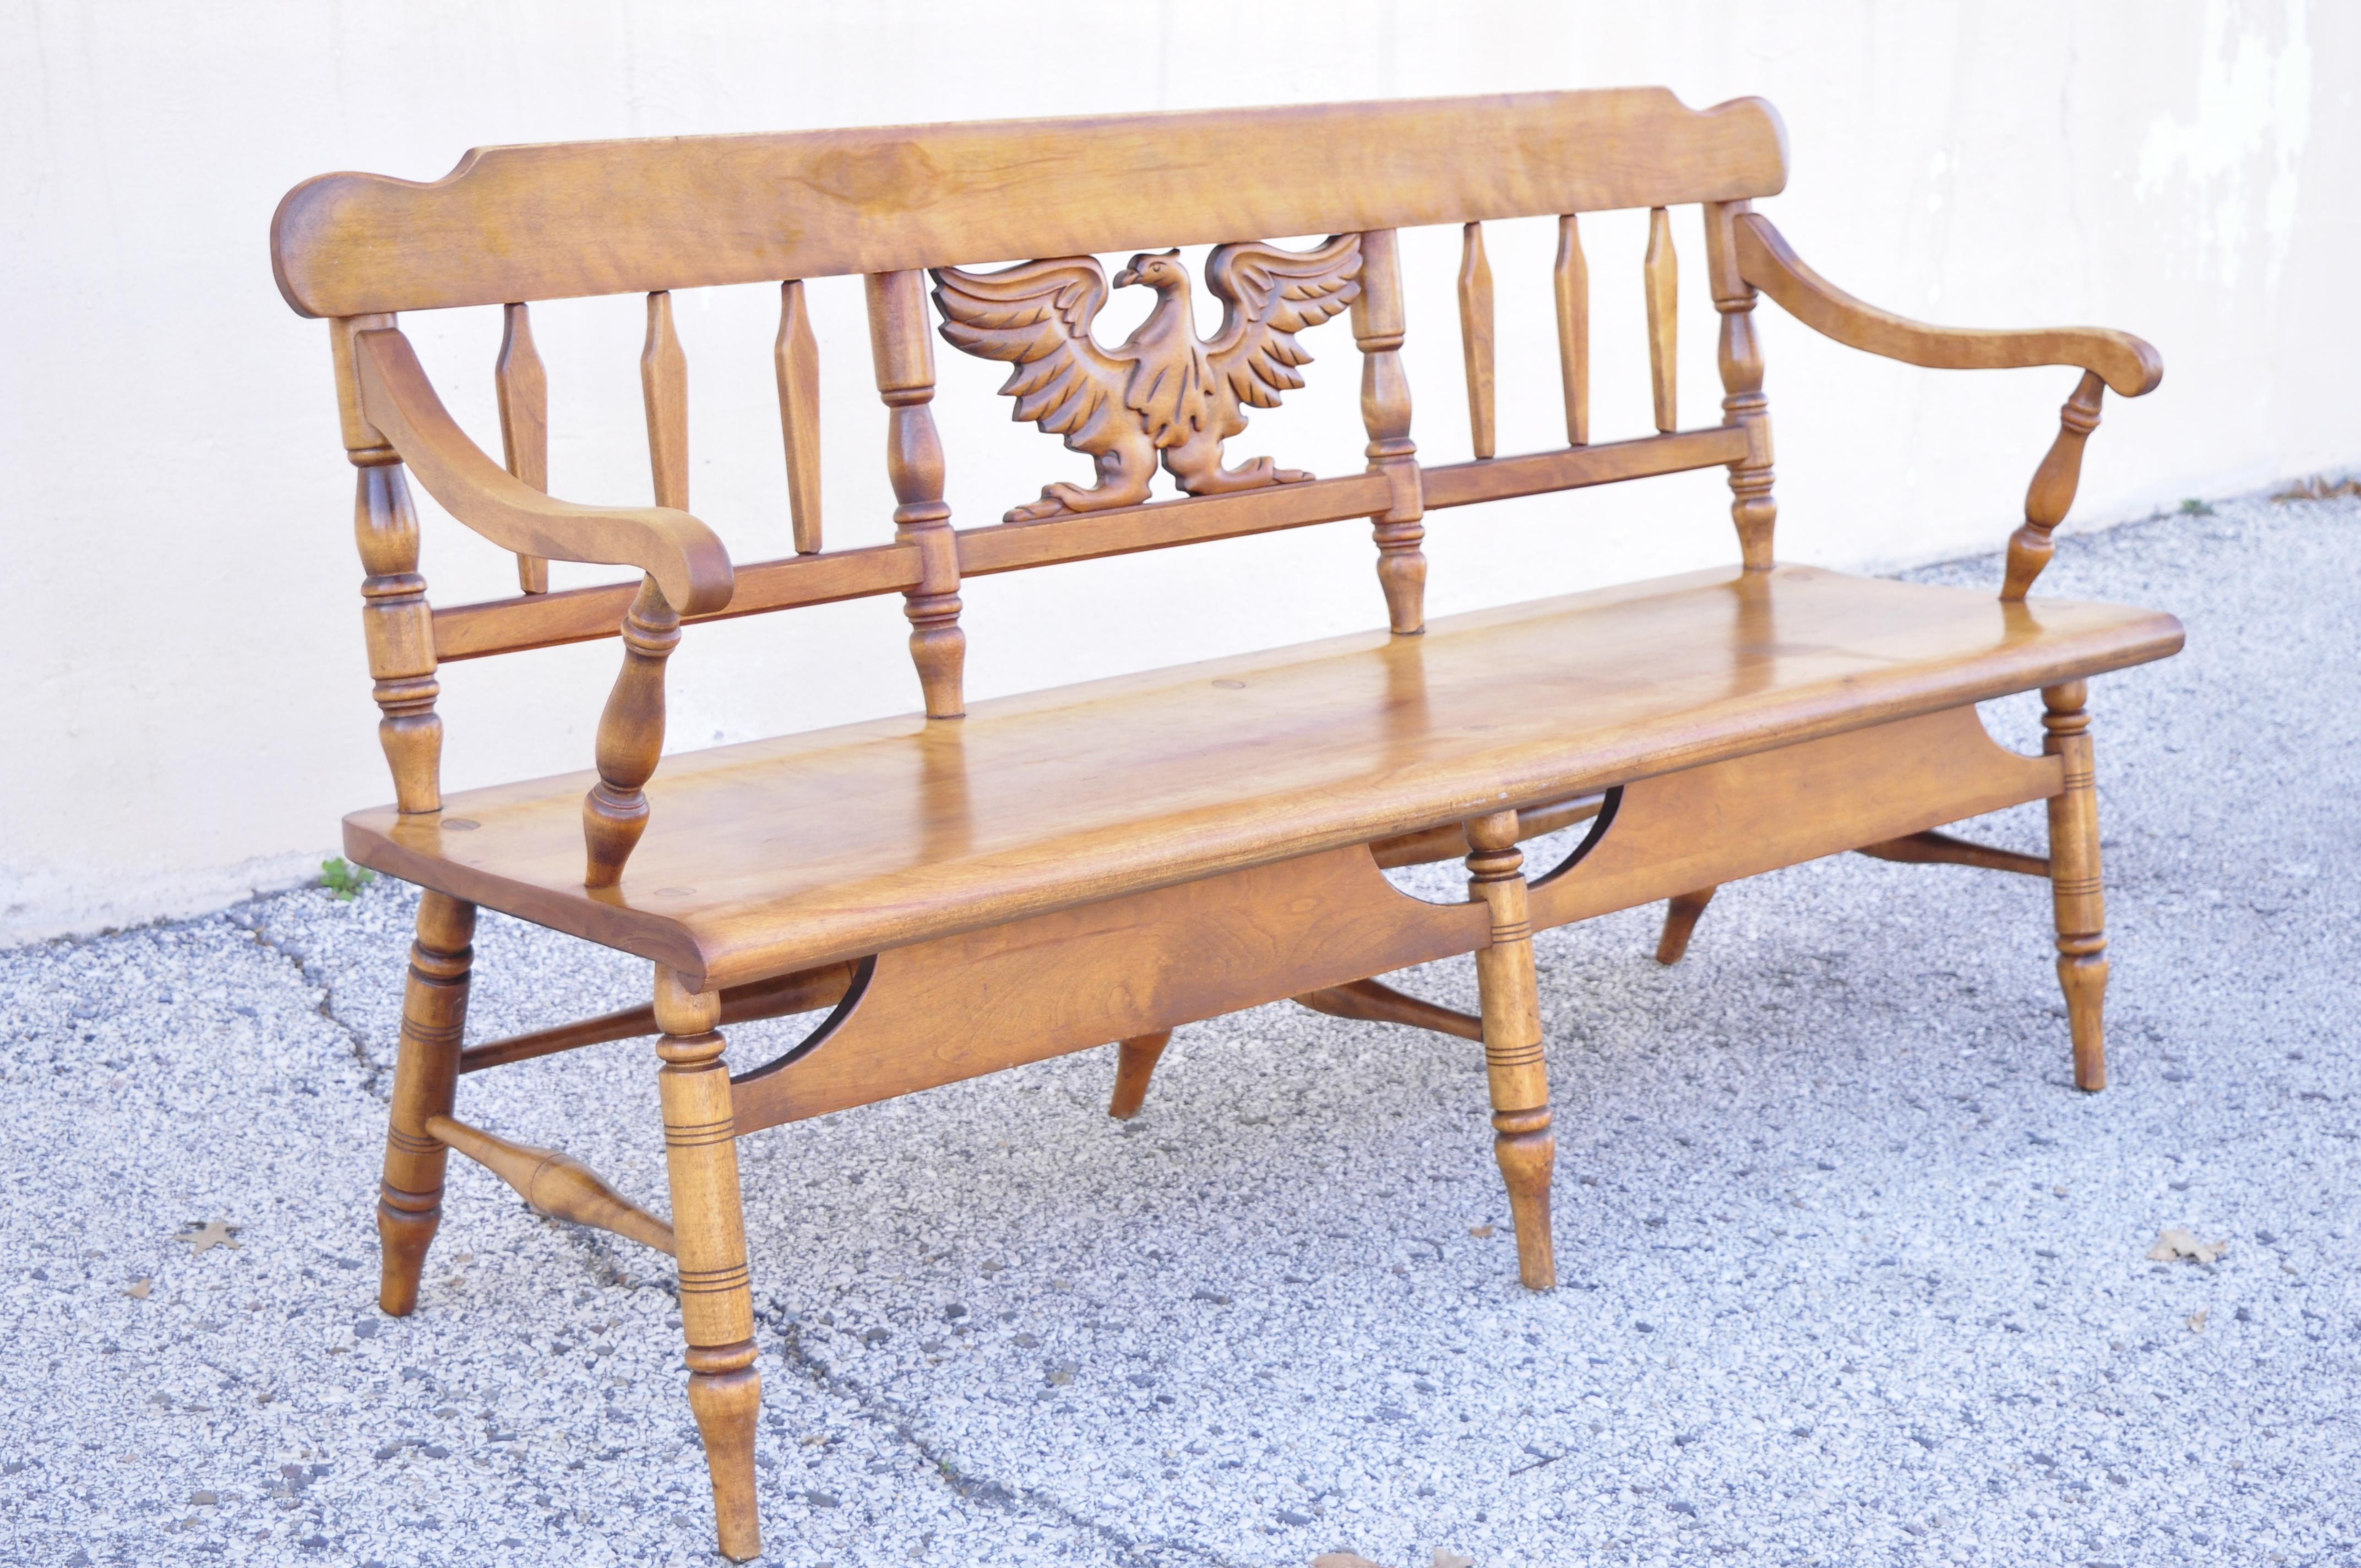 Vintage Cushman maple wood settee bench carved eagle back deacons bench. Item features carved wood eagle, (6) turn carved legs, brass rolling casters, solid wood construction, beautiful wood grain, original label, very nice vintage item, quality